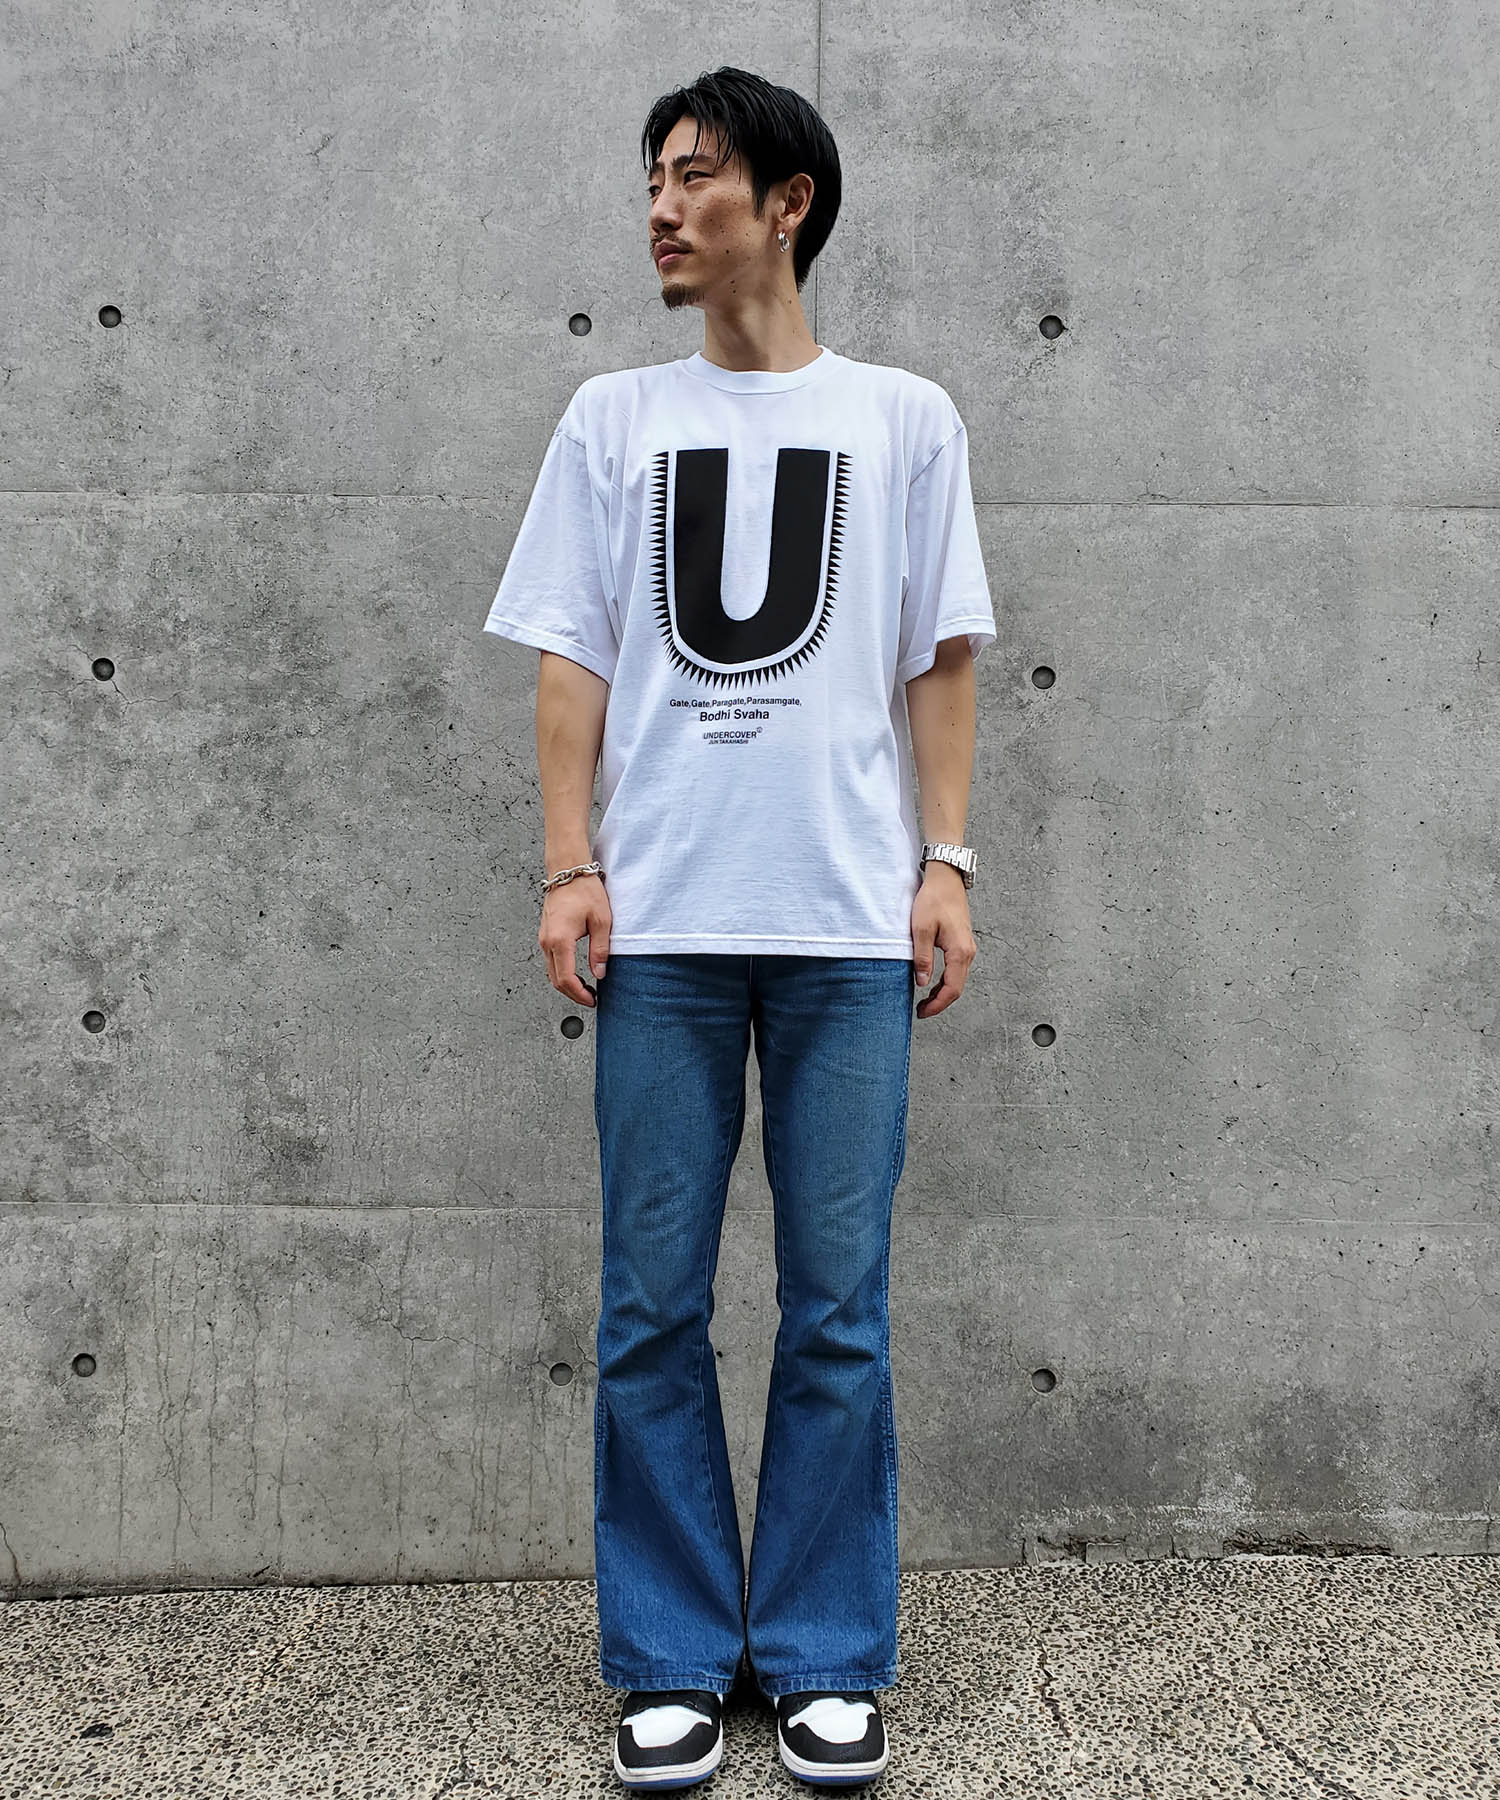 undercover Tシャツ SIZE S - Tシャツ/カットソー(半袖/袖なし)